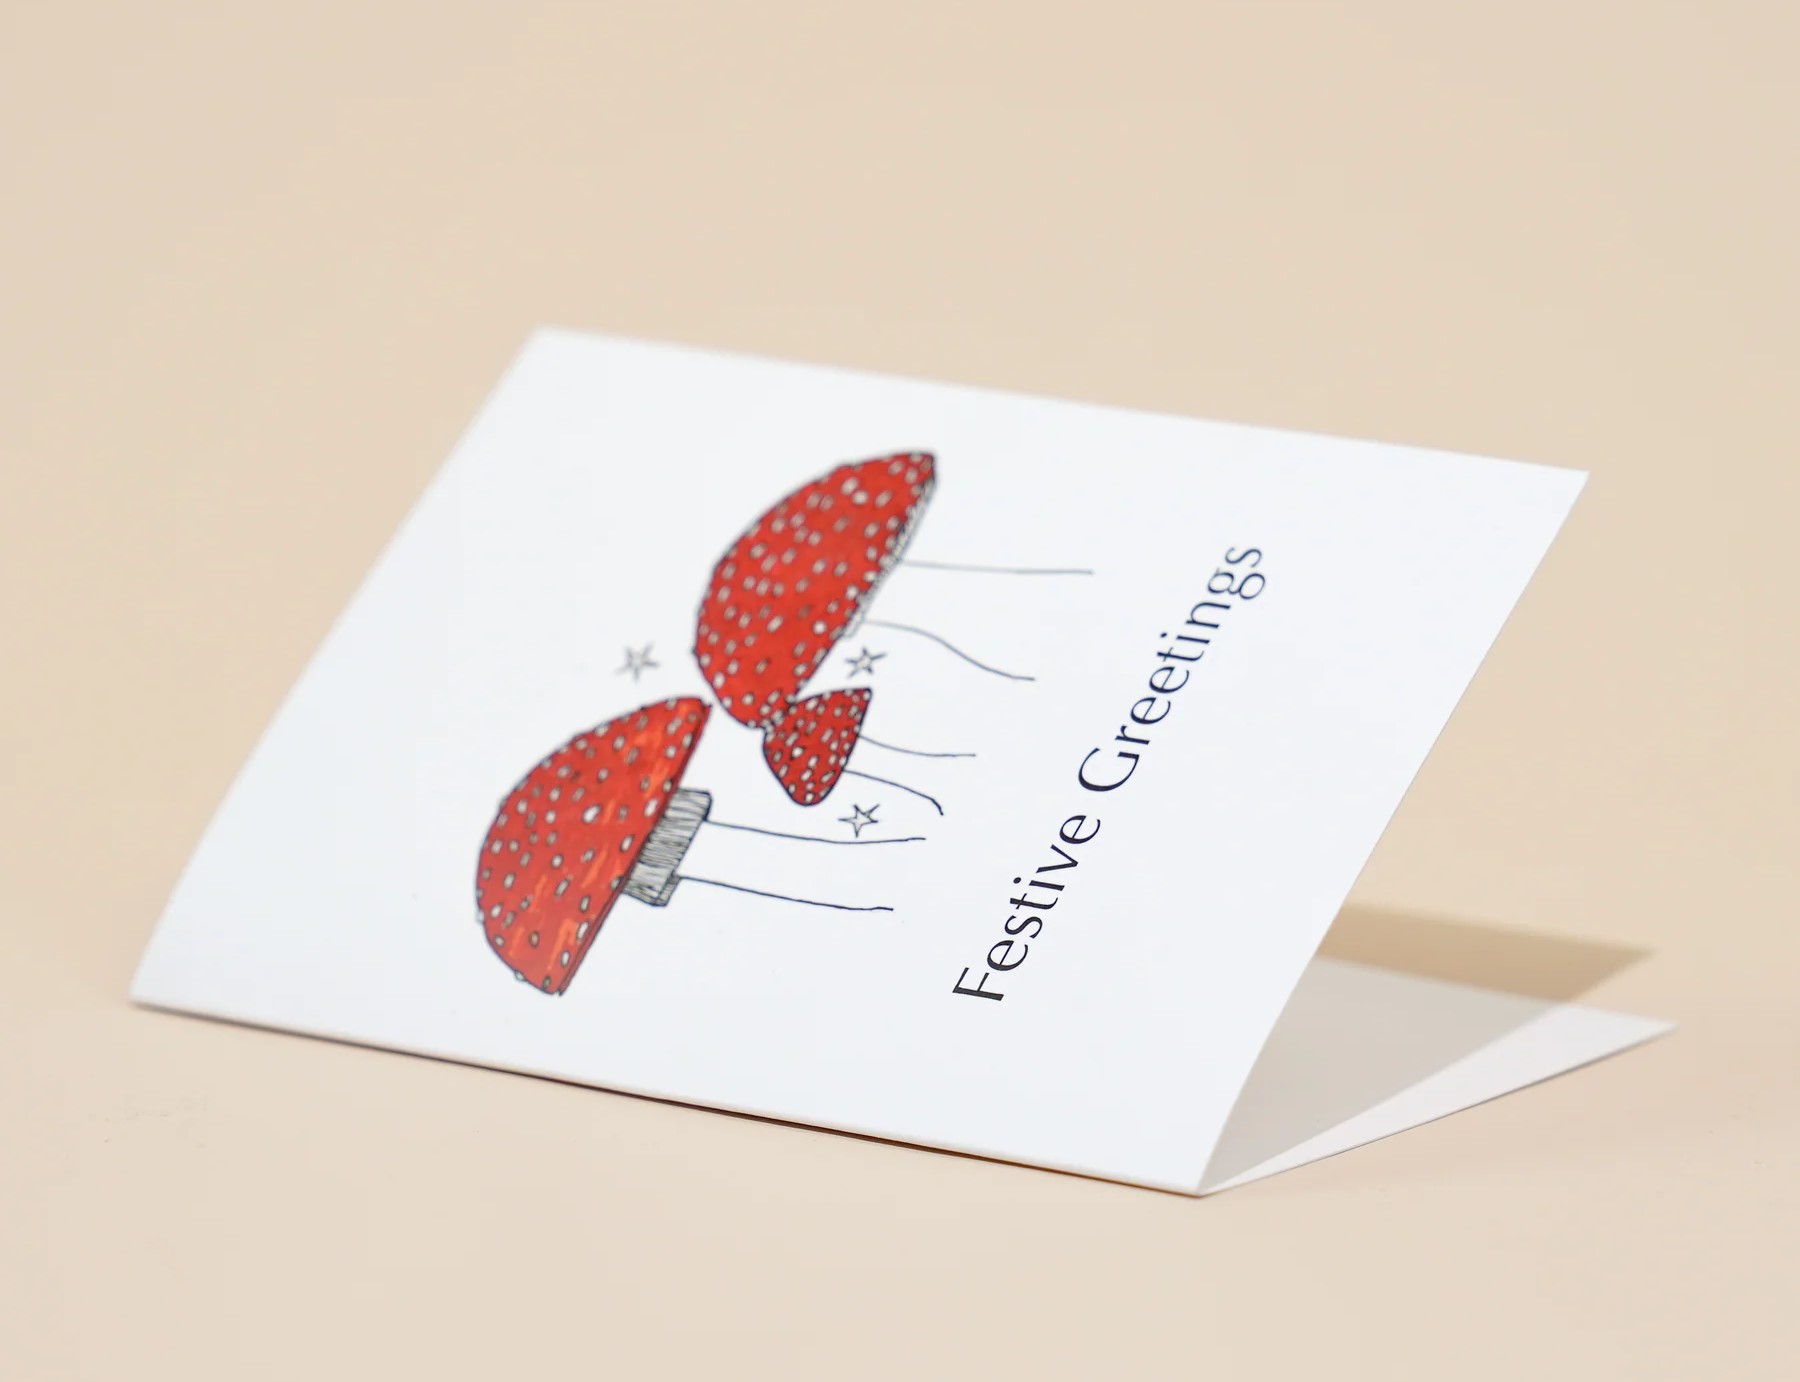 The Surprising Truth About Greeting Cards: Are They Still Sent Or Replaced By Email And Texts?